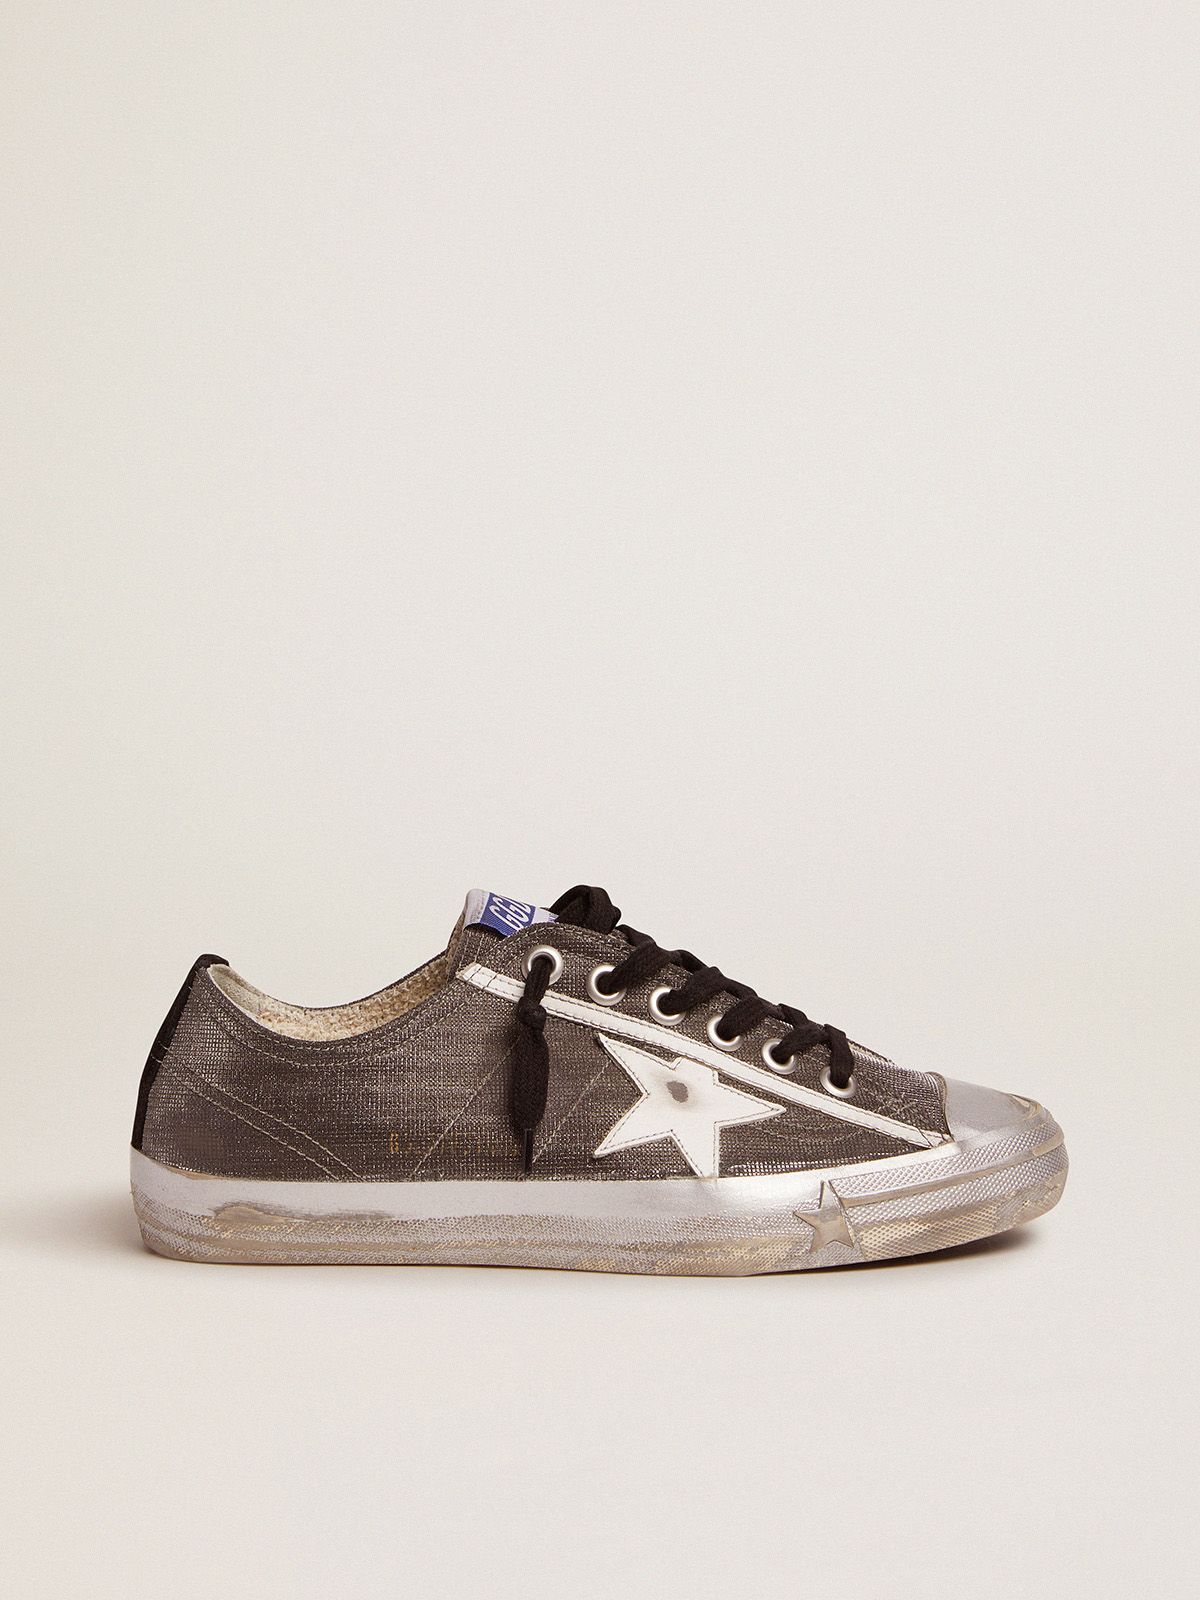 golden goose gray sneakers white pattern checkered and with Dark V-Star LTD star